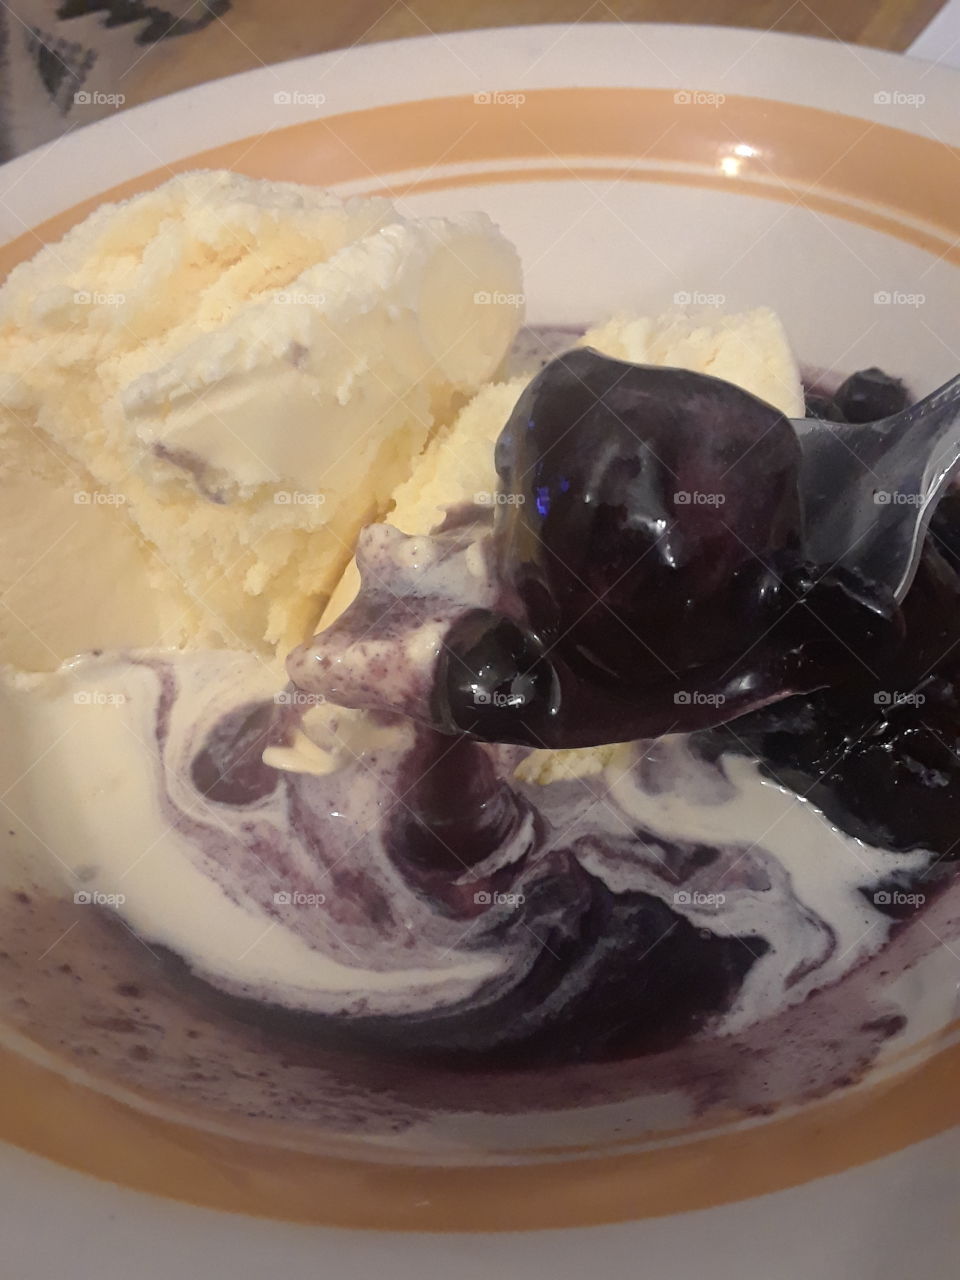 Native American Heritage Month. 
Blue Berry Dumpling  side of ice cream